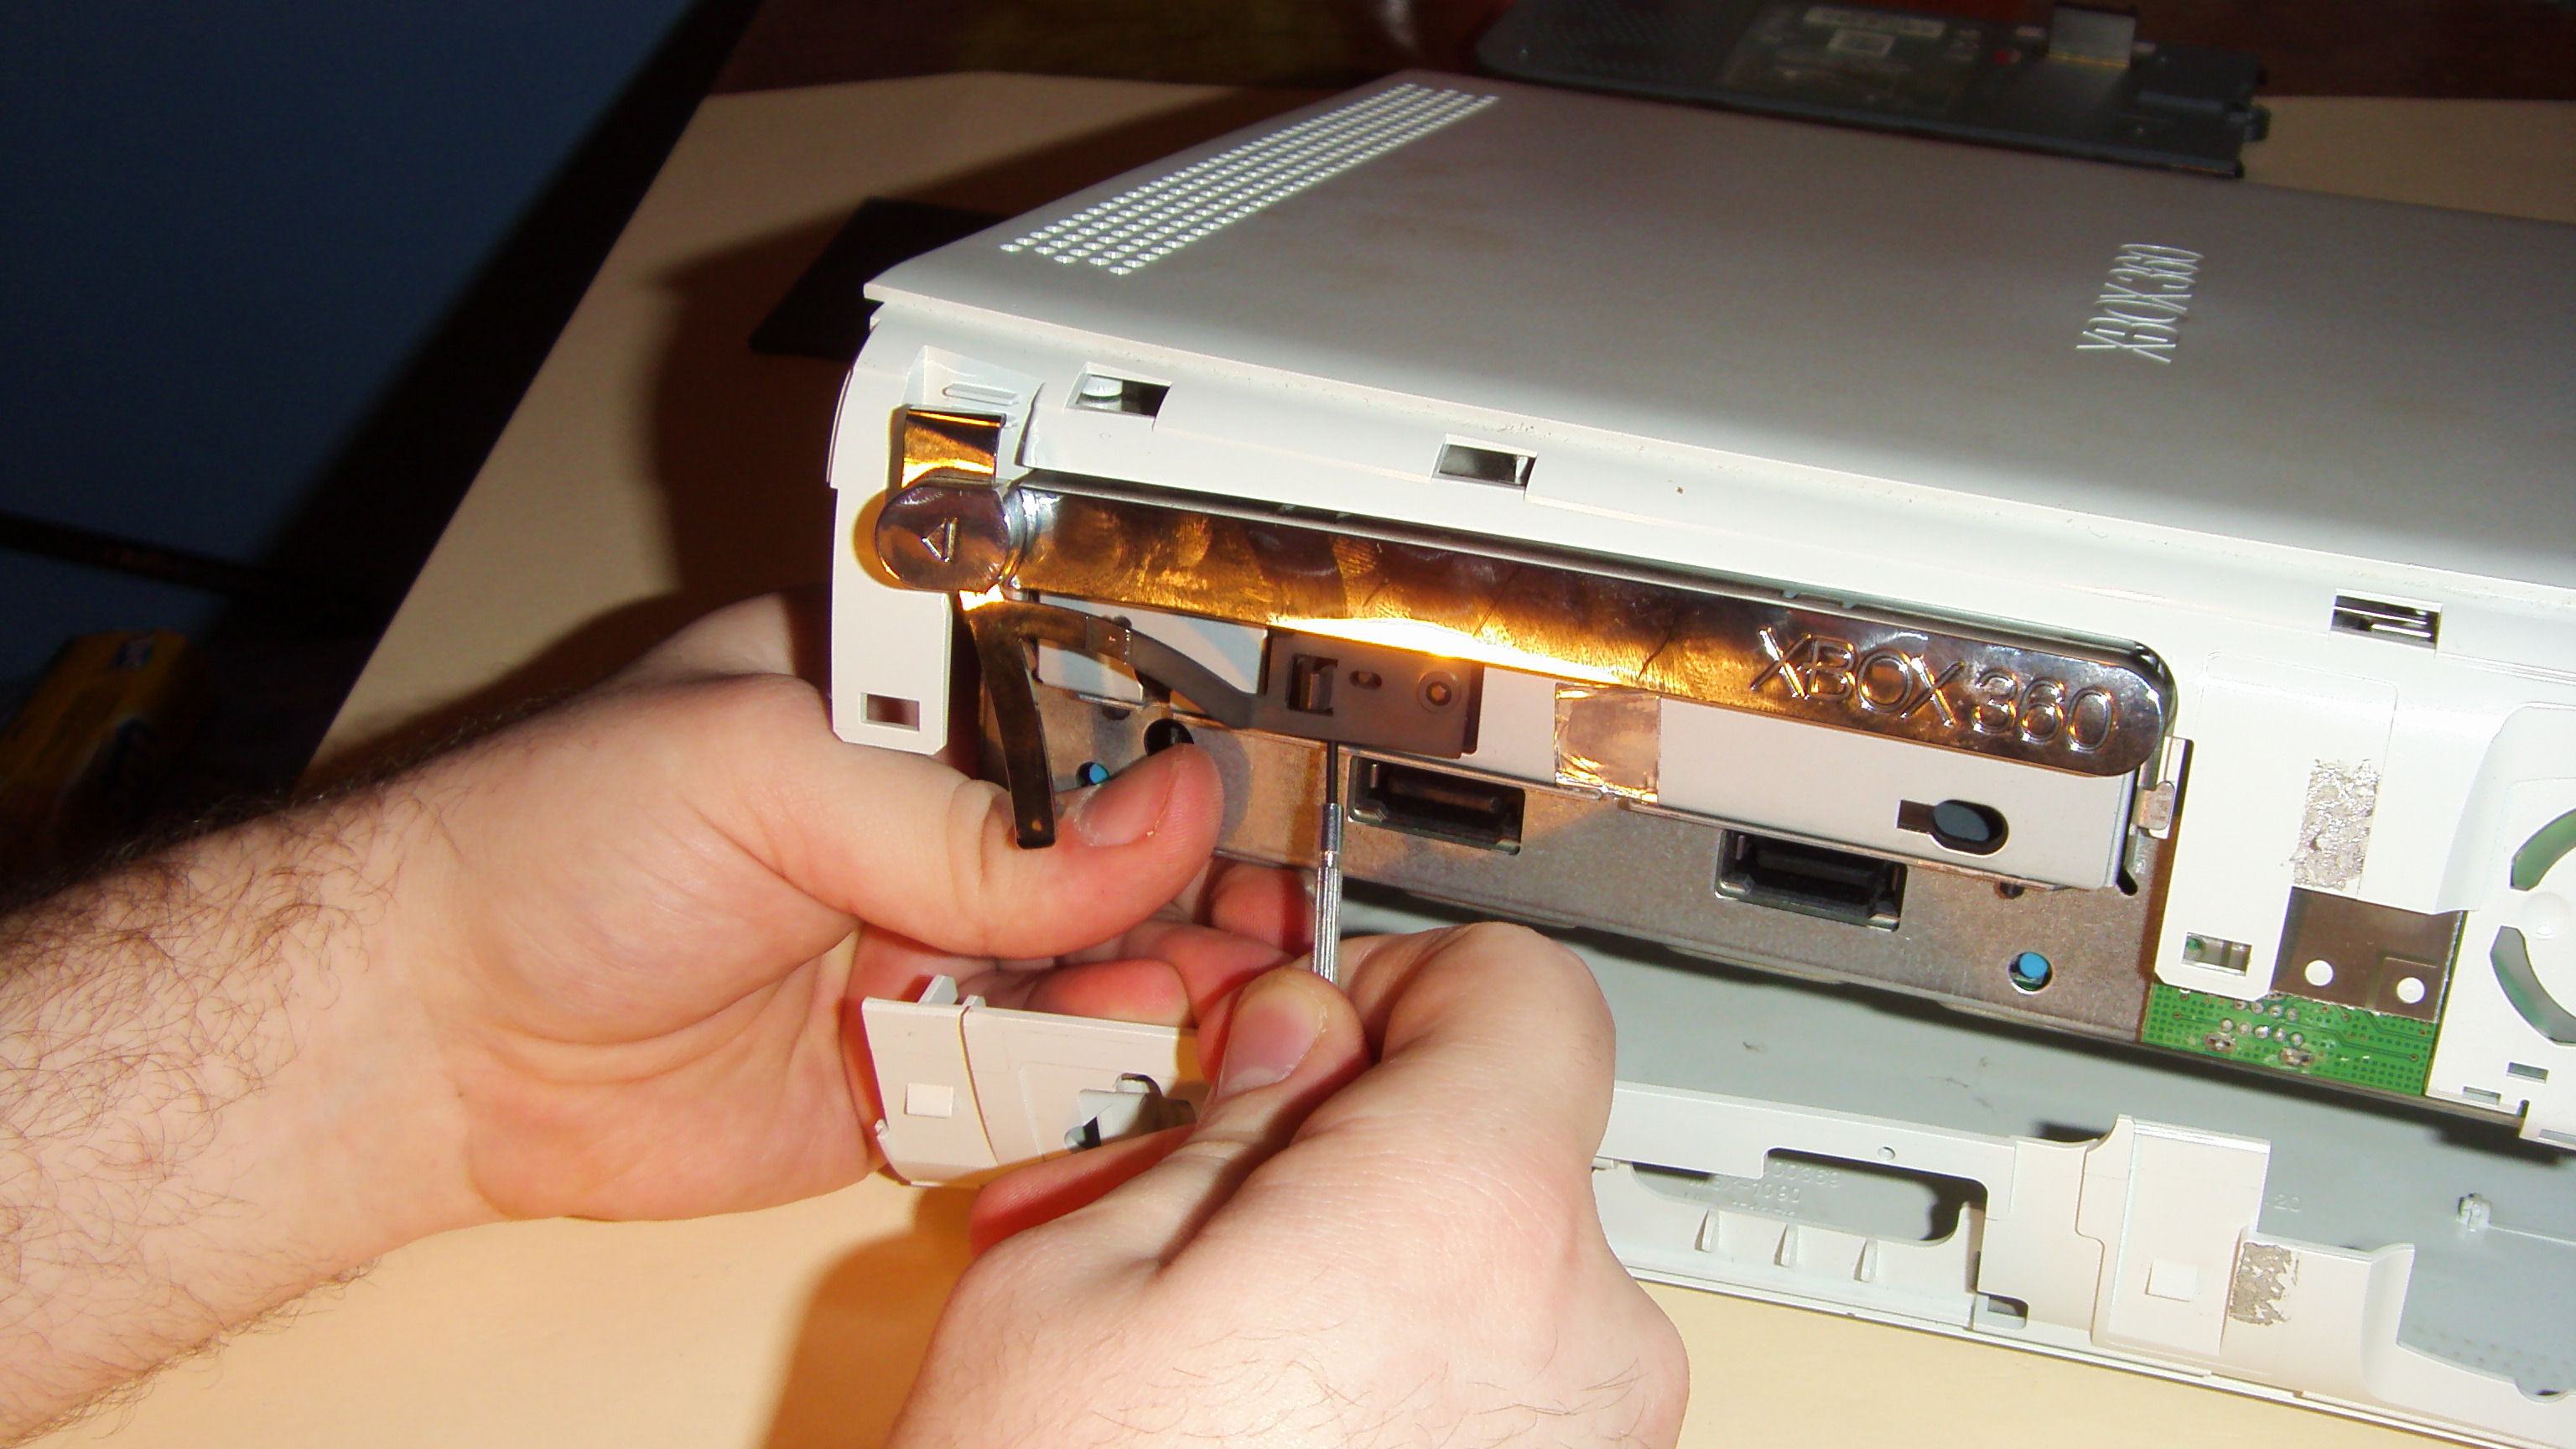 Mutual Moronic Hilarious Page 2 - Remove Outer Case - Disassemble Xbox 360 Console & HDD Bay